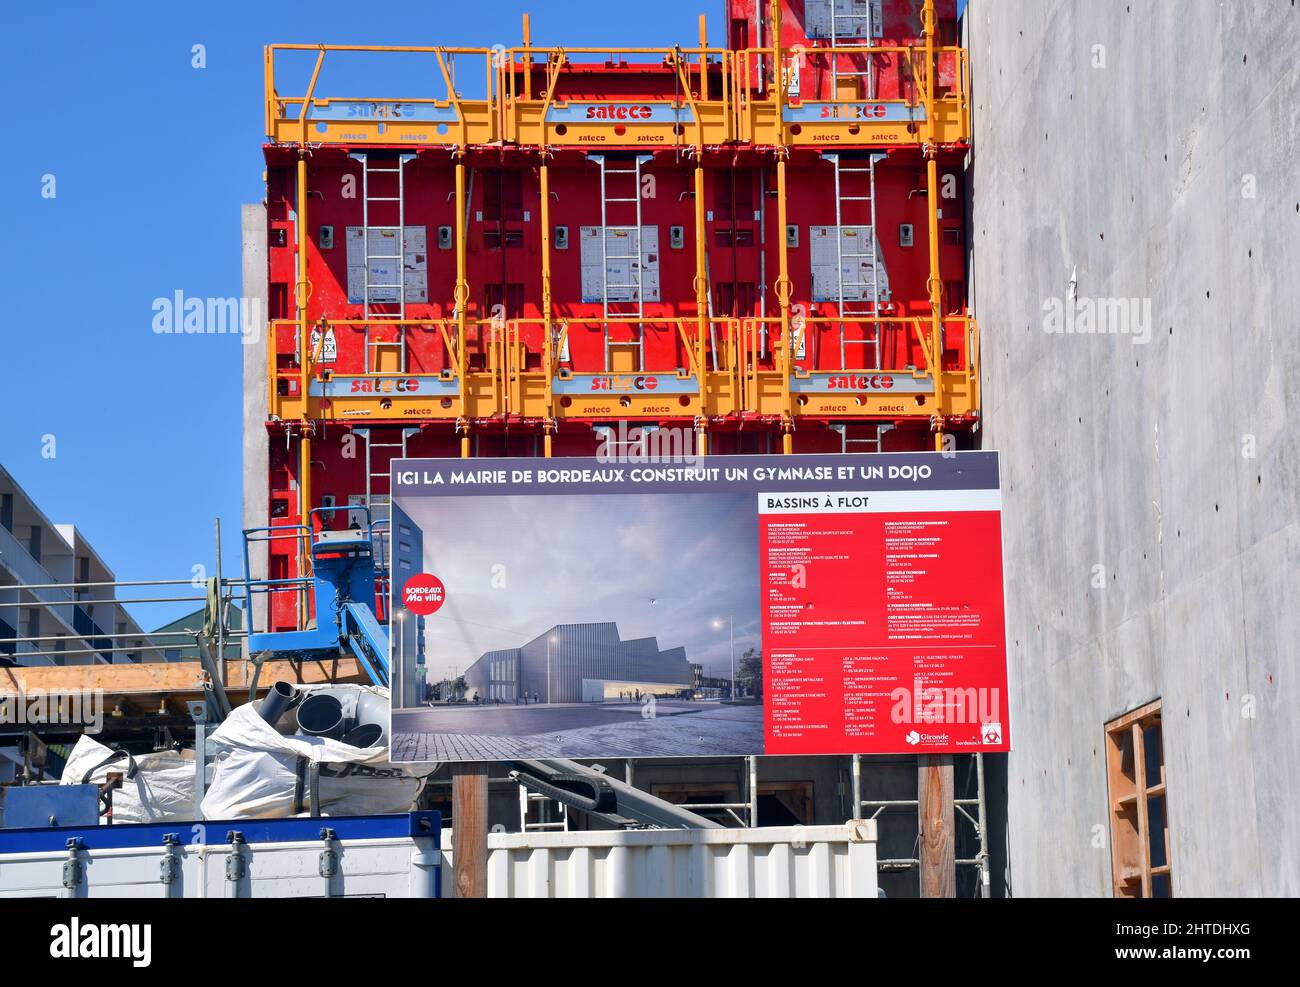 An unusually colourful building site, bright red reusable shuttering and orange guardrails and scaffolding, A gymnasium and a dojo being built. Stock Photo